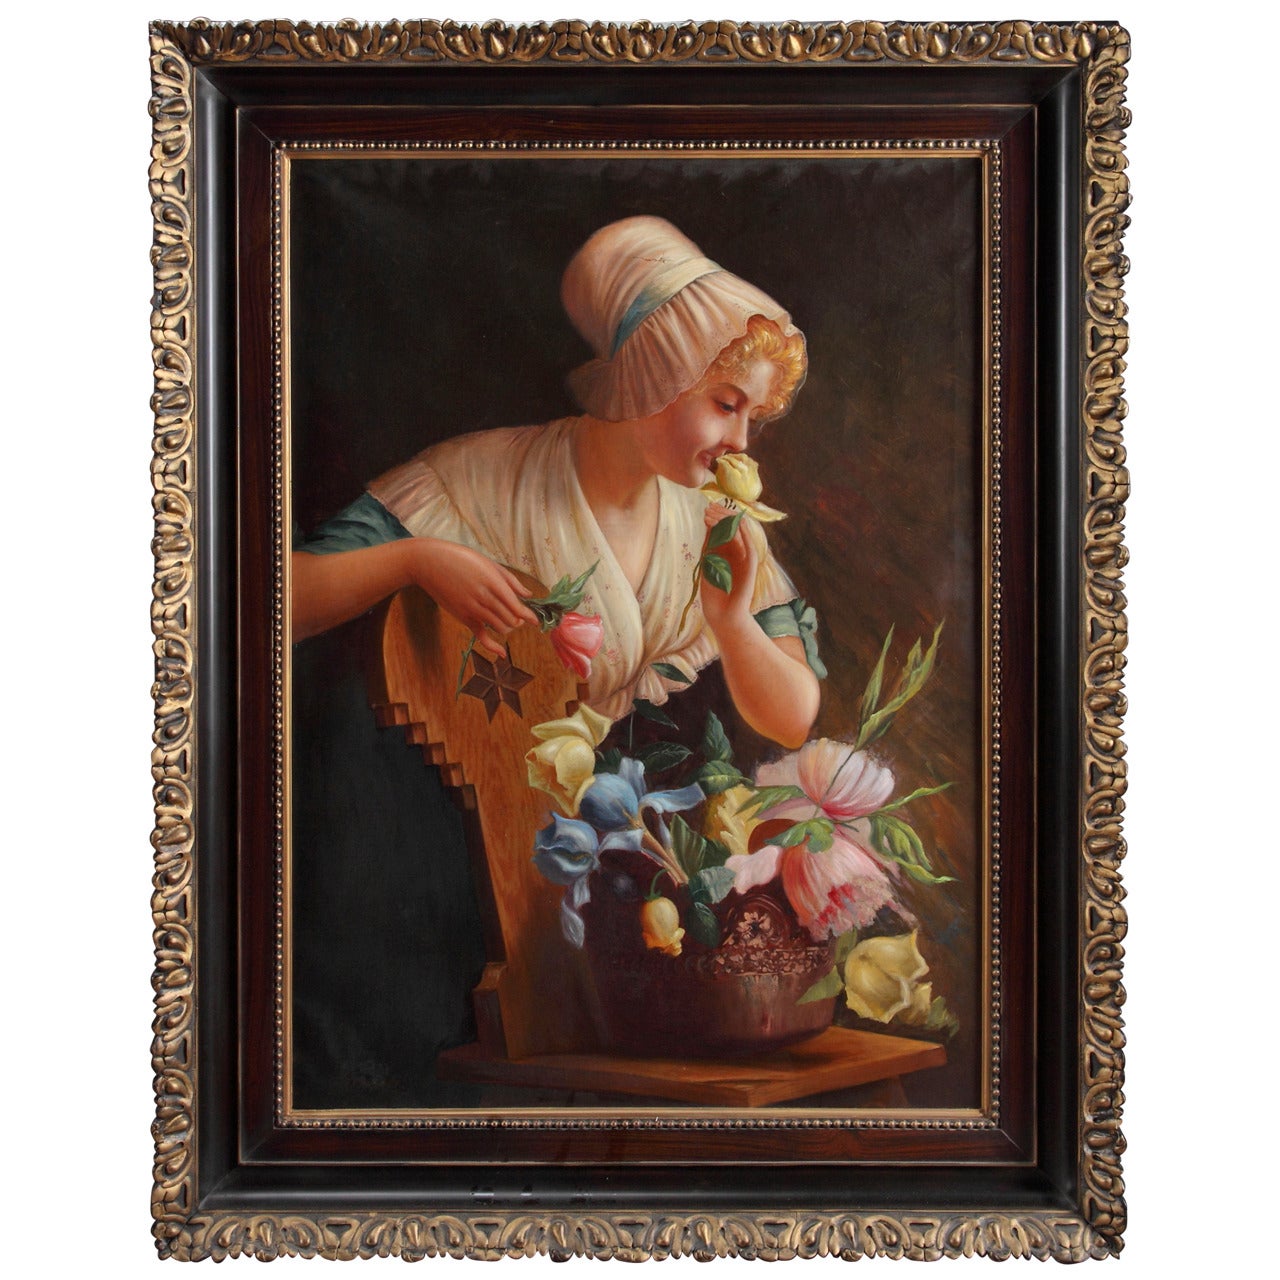 Italian Portrait of a smiling Lady with a Basket of flowers